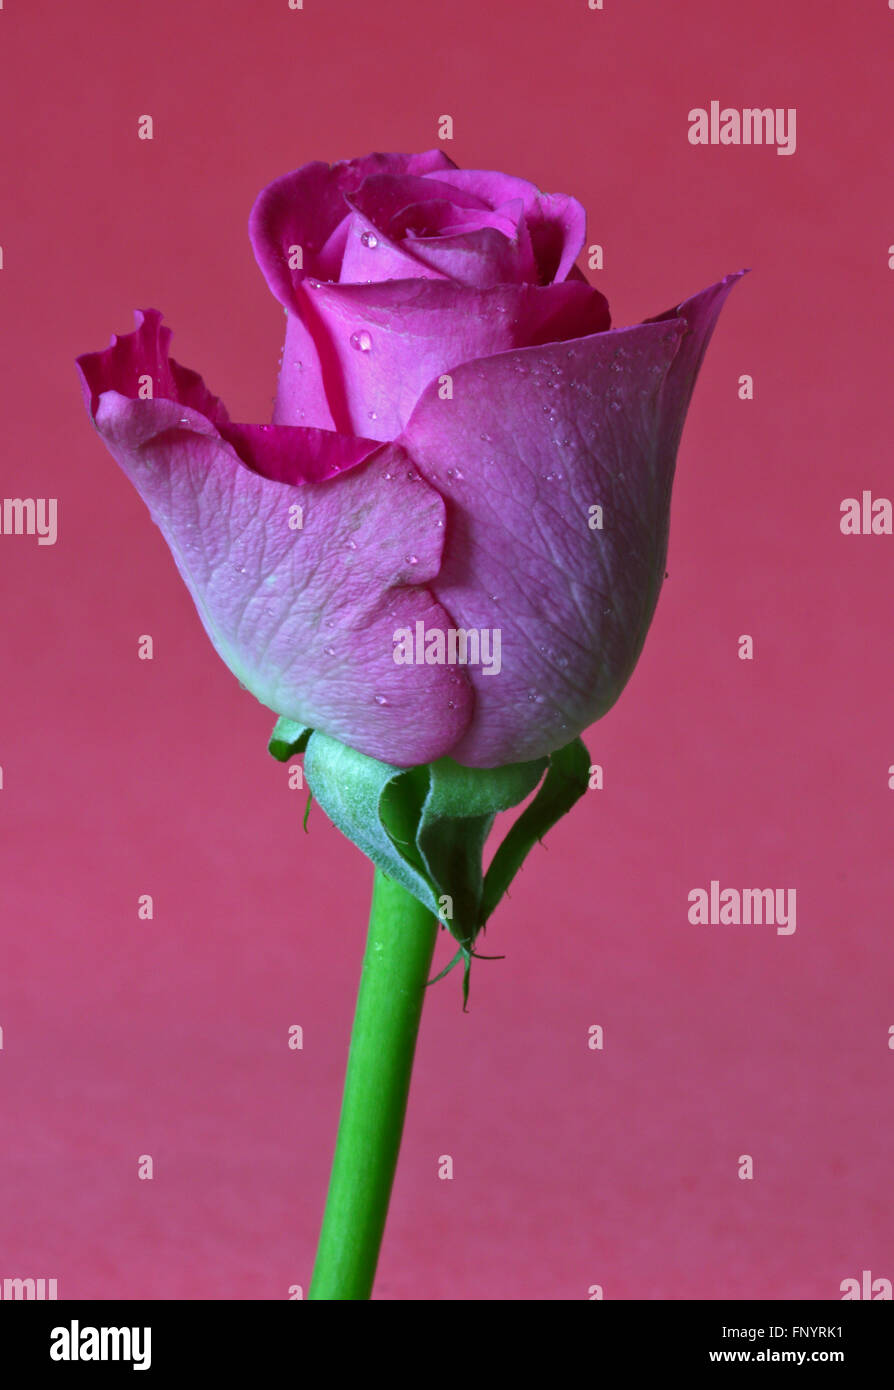 Pink Rose Bud on Pink Background Stock Photo